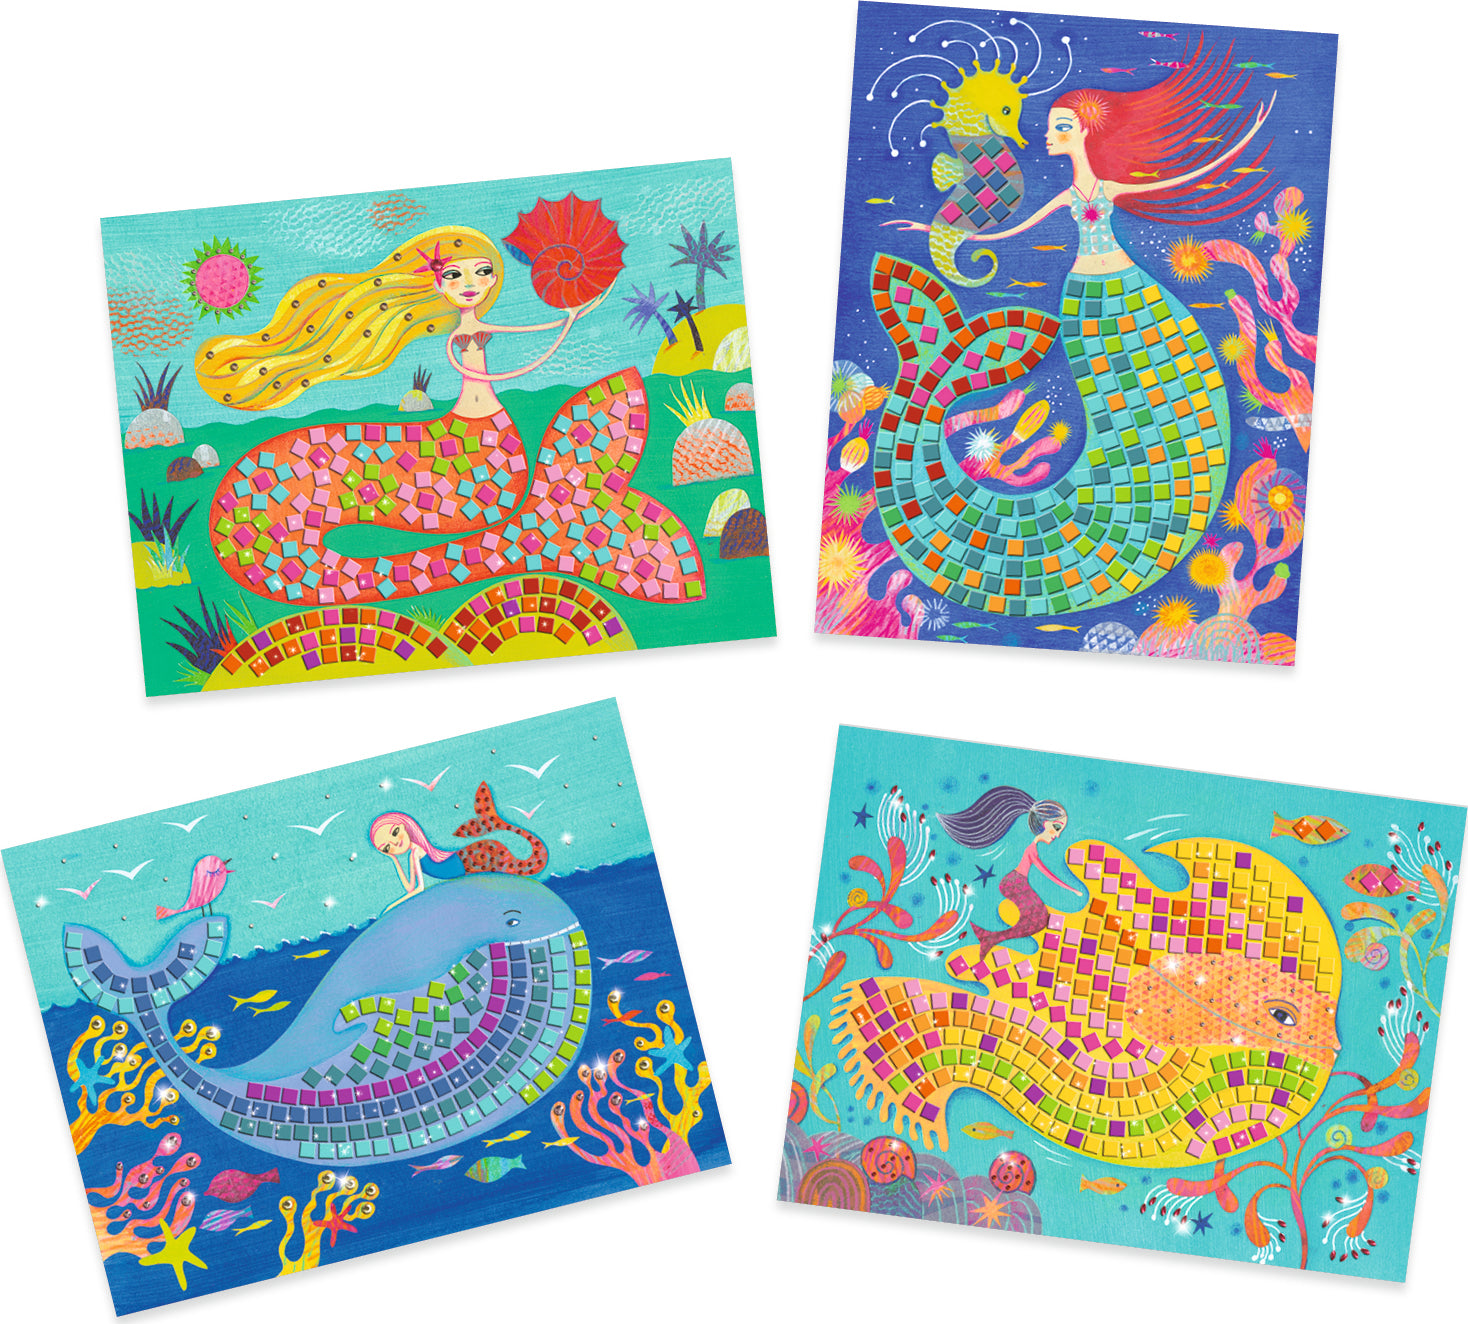  homicozy Art Supplies for Kids Ages 4-12,Mermaid